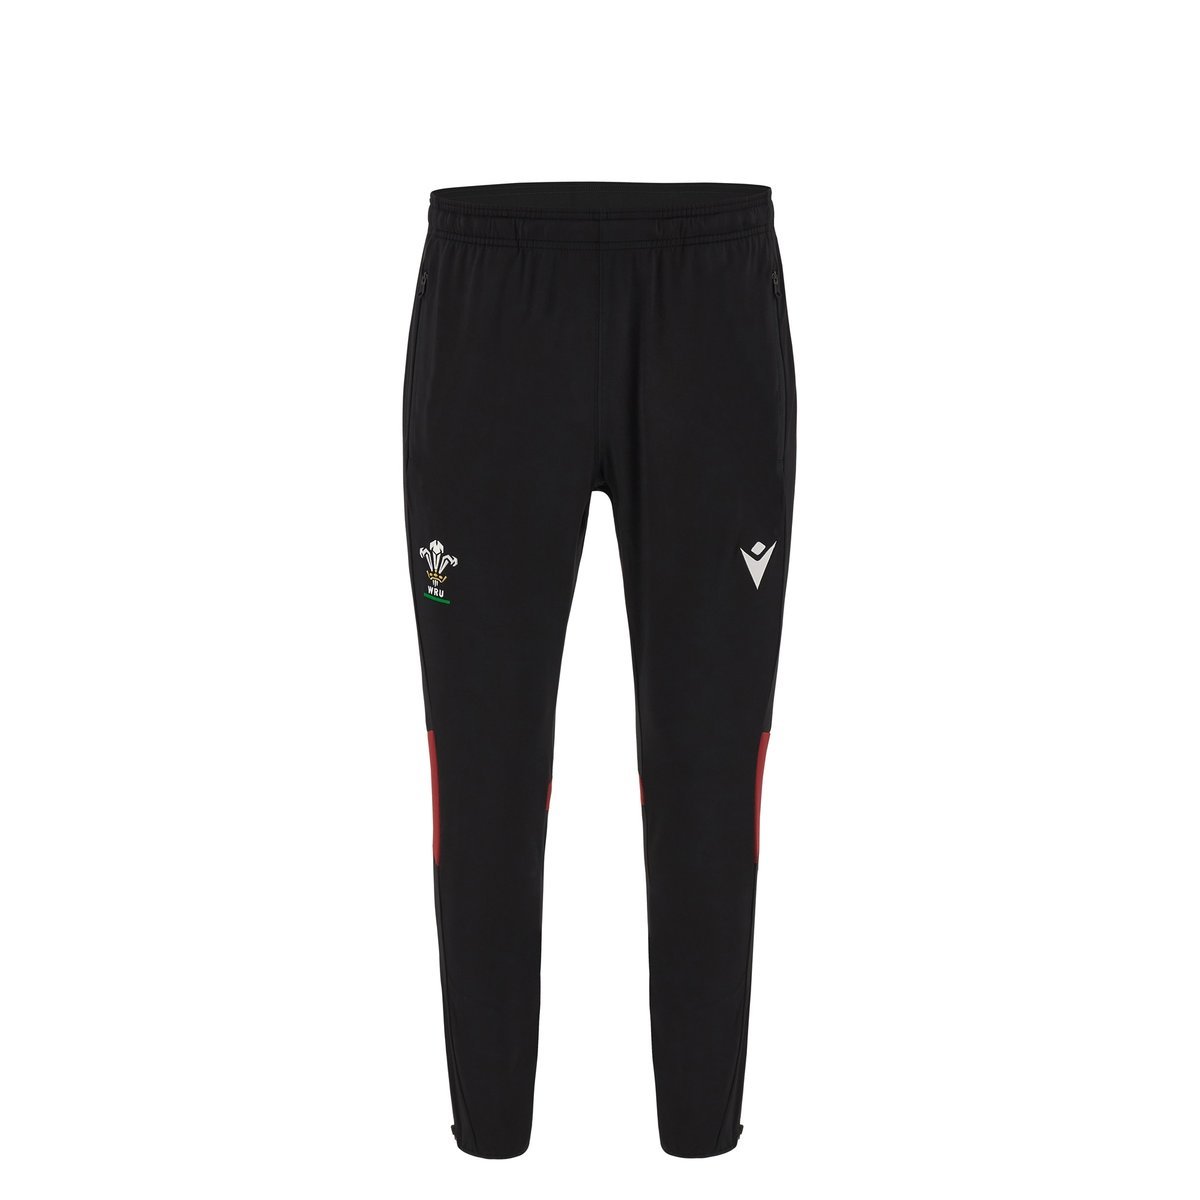 Macron Wales 23/24 Fitted Training Pants Kids